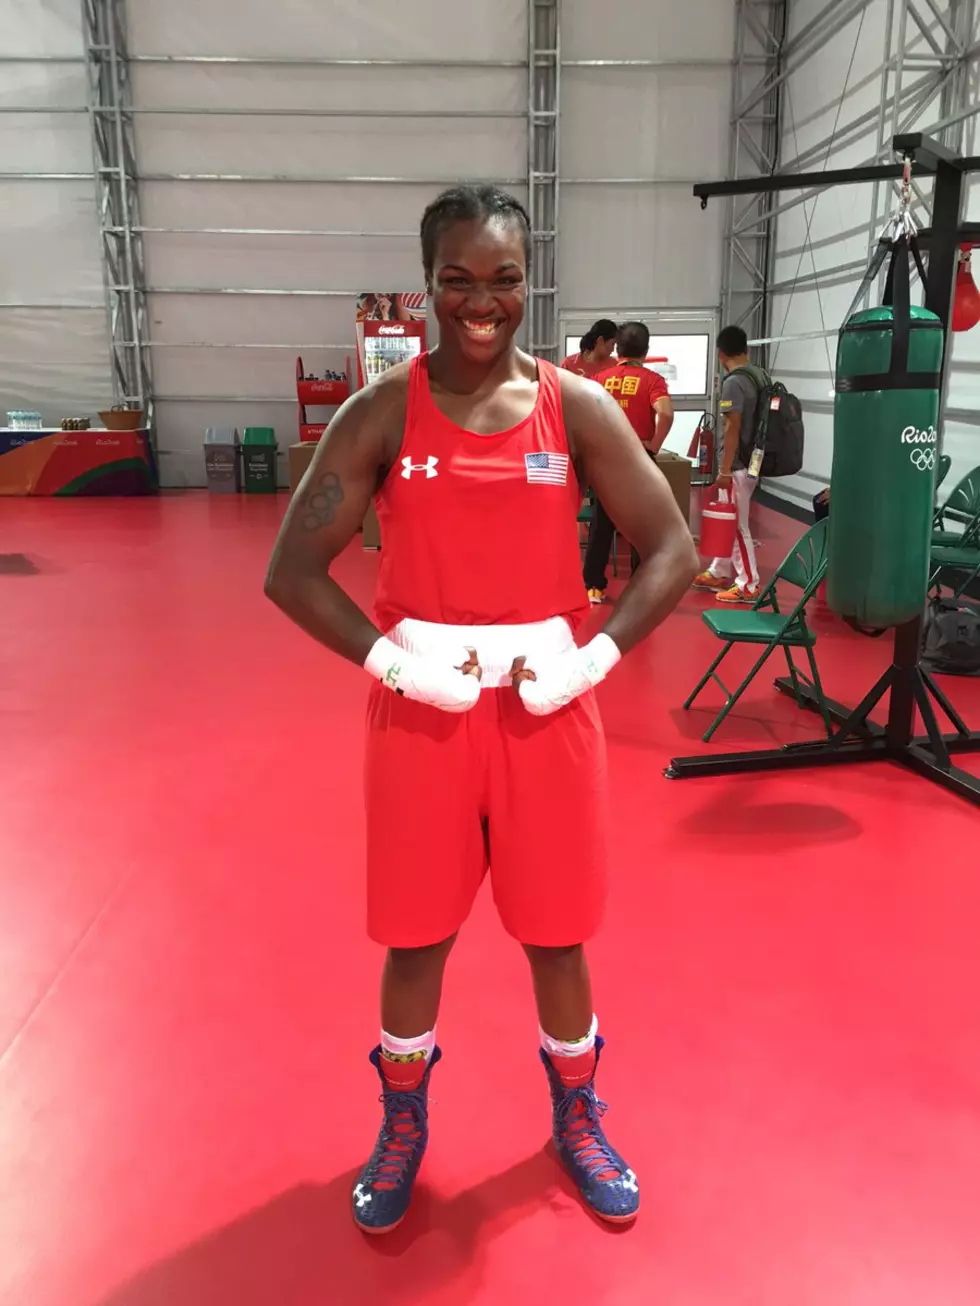 Claressa Shields Wins, Will Fight for Gold [PHOTO]